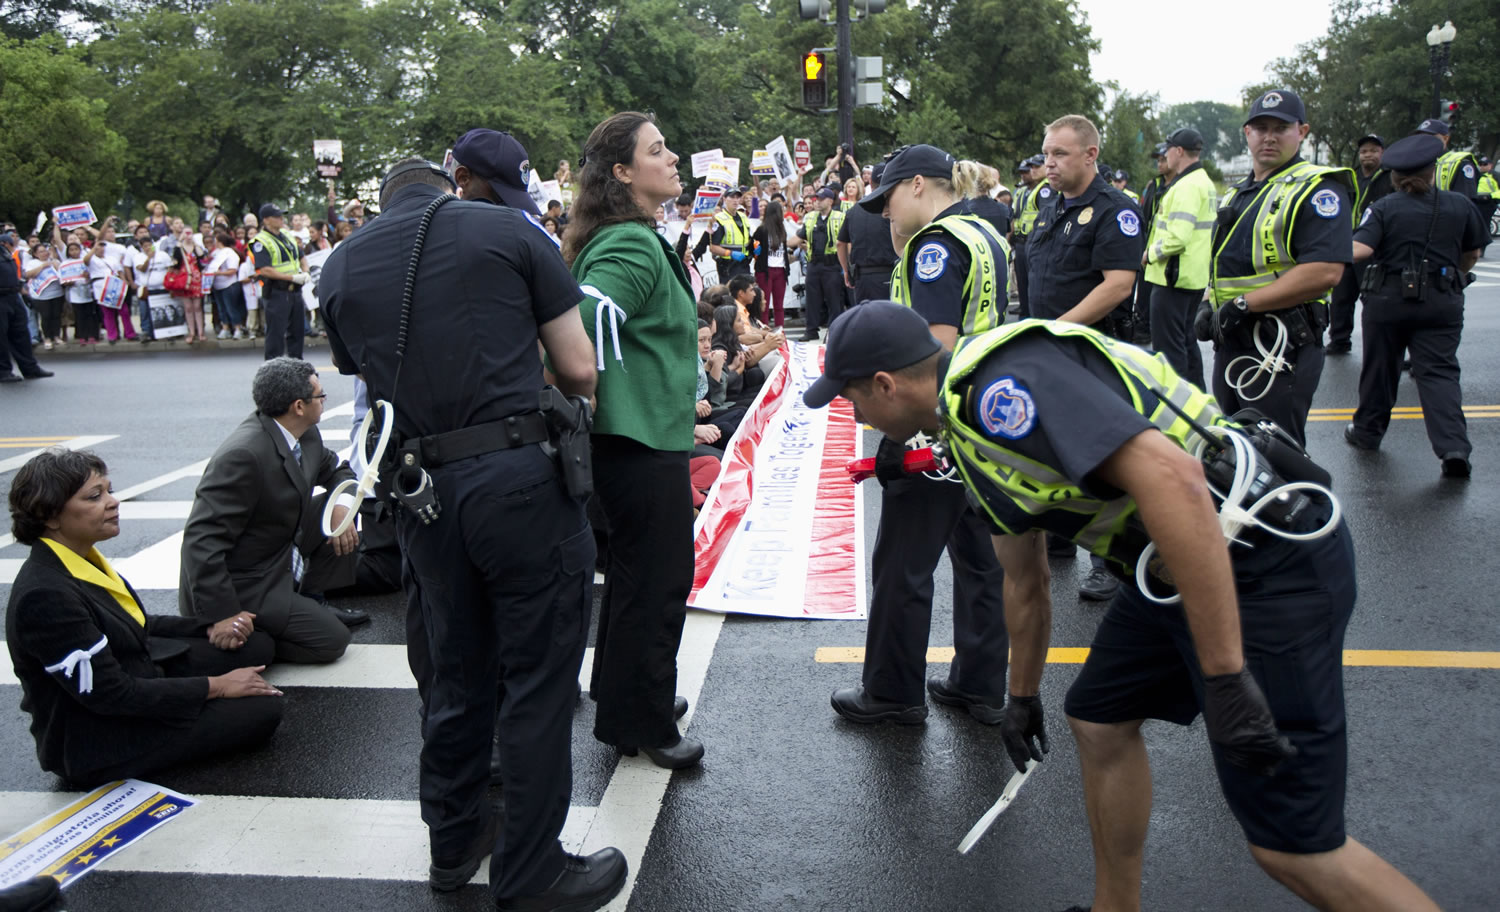 Capitol Hill police officers arrest immigration reform protestors as they blocked a street on Capitol Hill in Washington on Thursday.